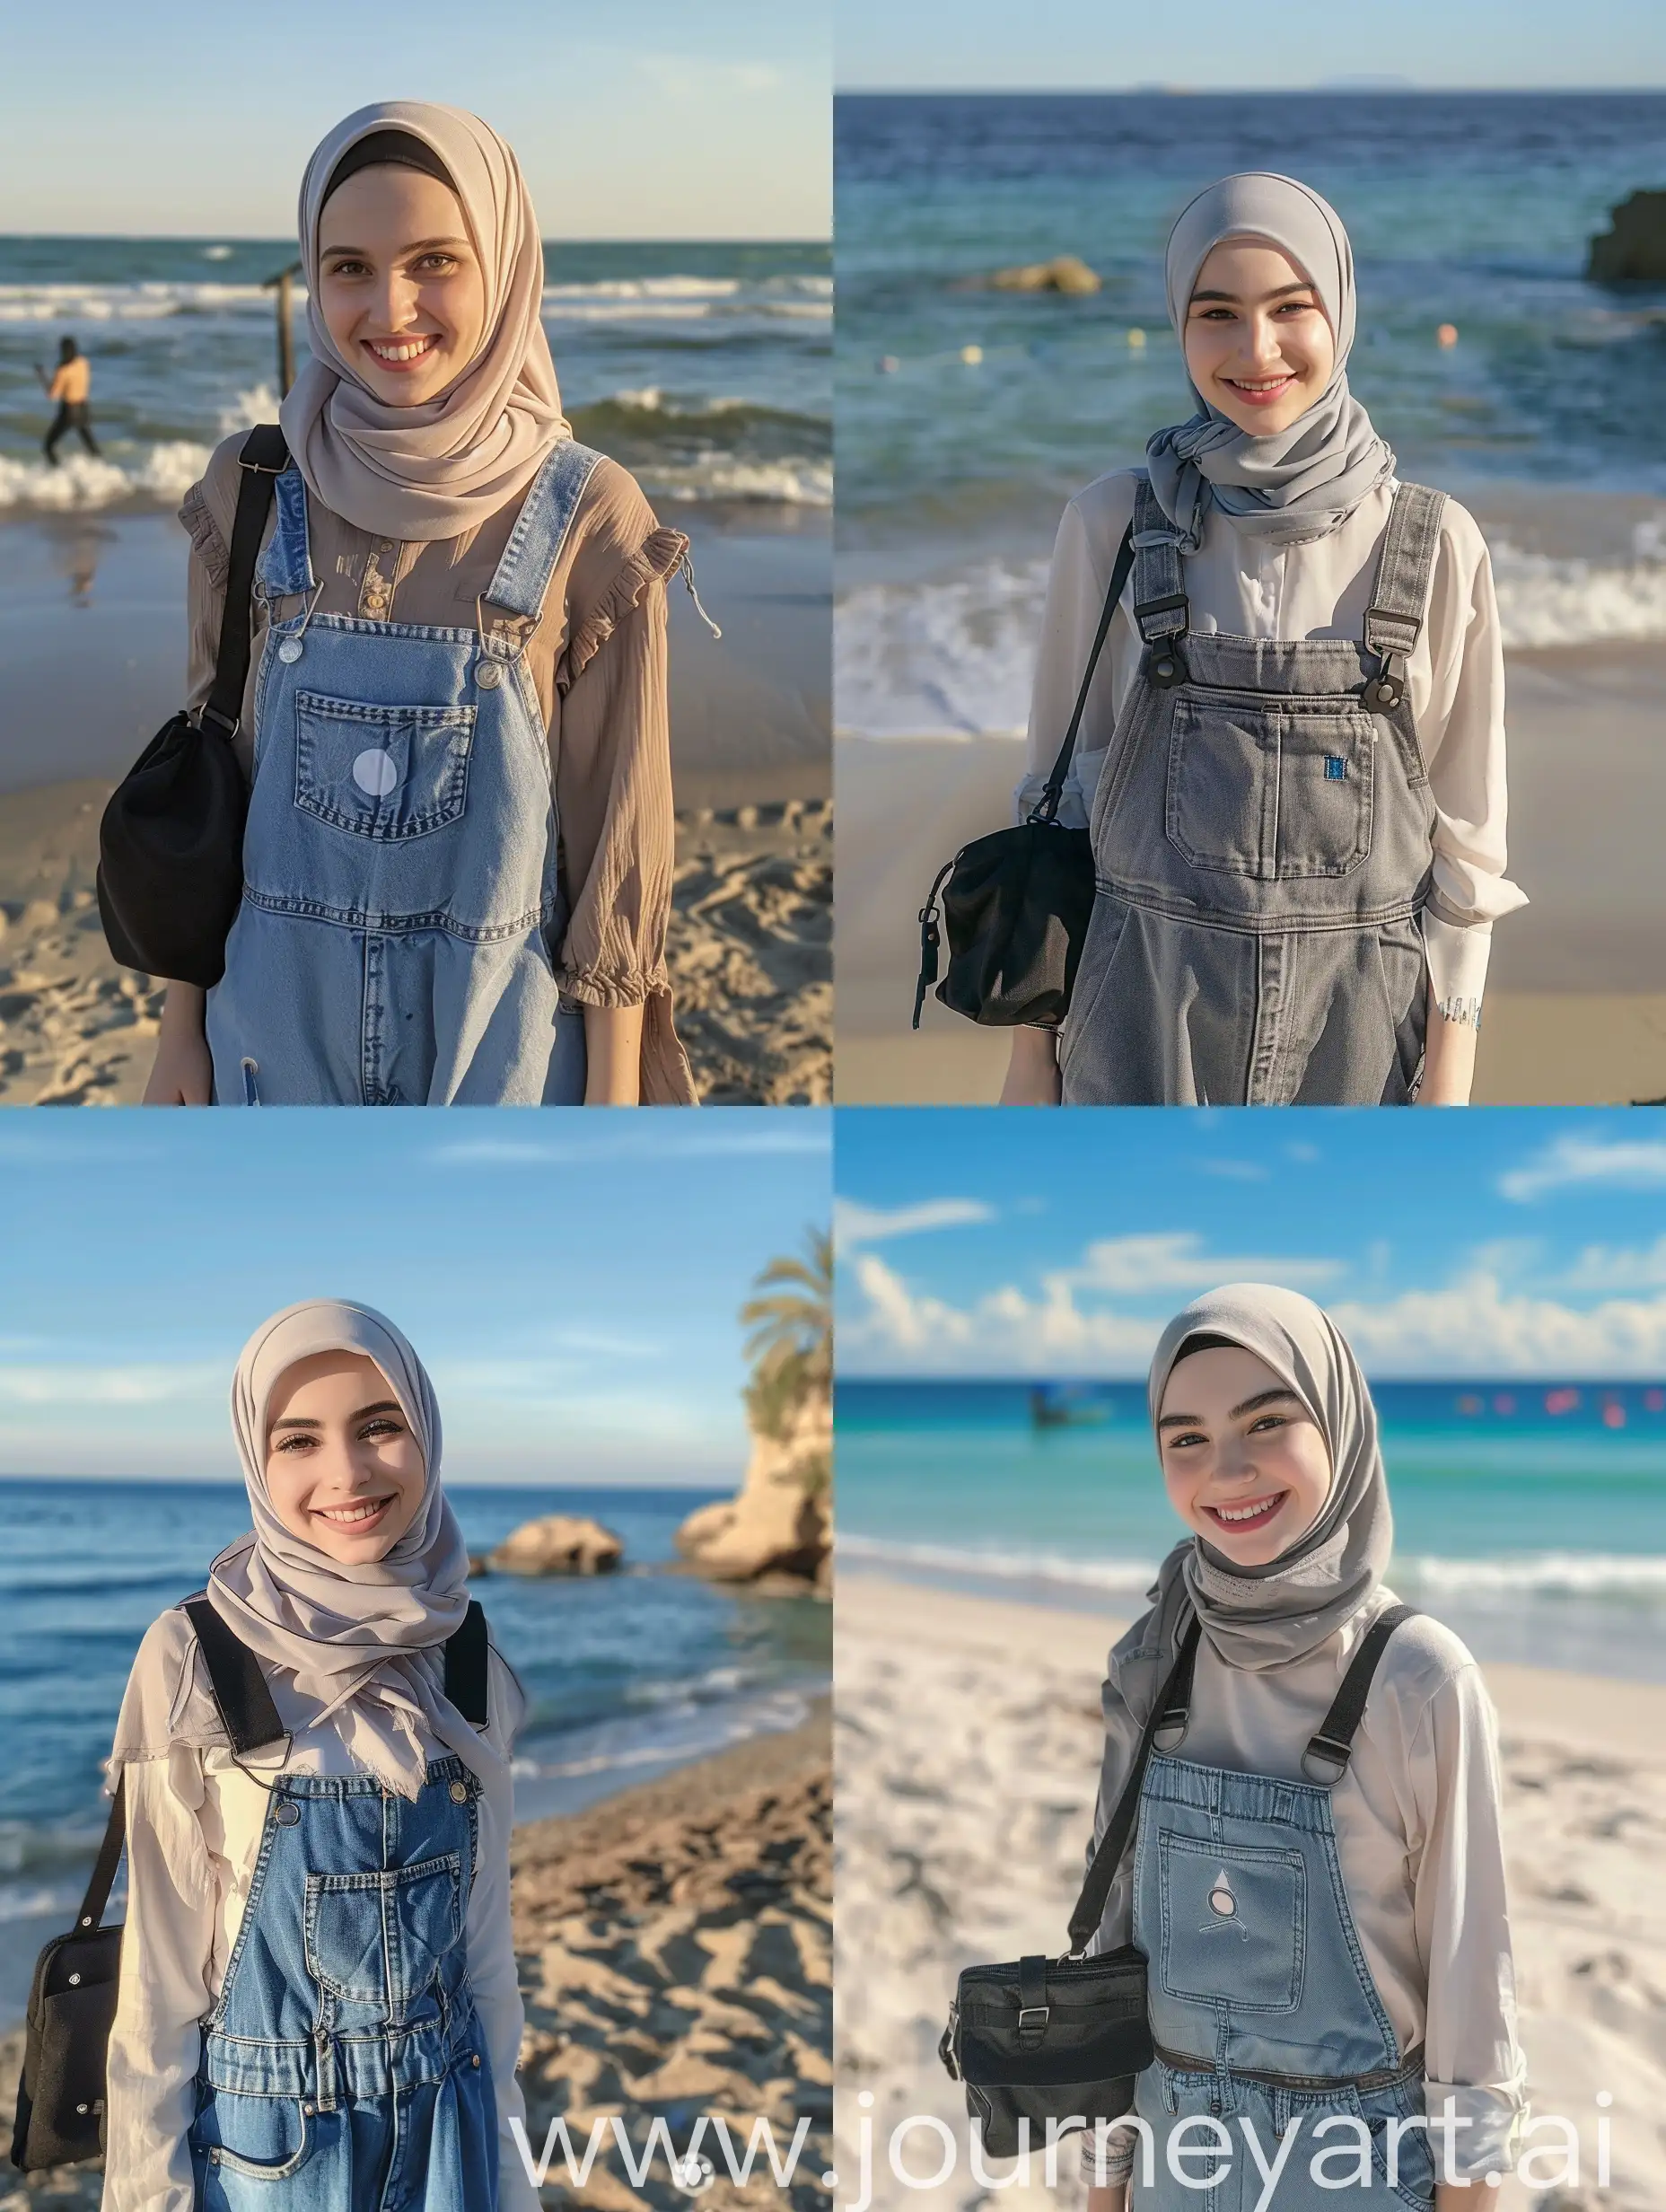 Smiling-Russian-Hijab-Girl-in-Overalls-at-Beautiful-Beach